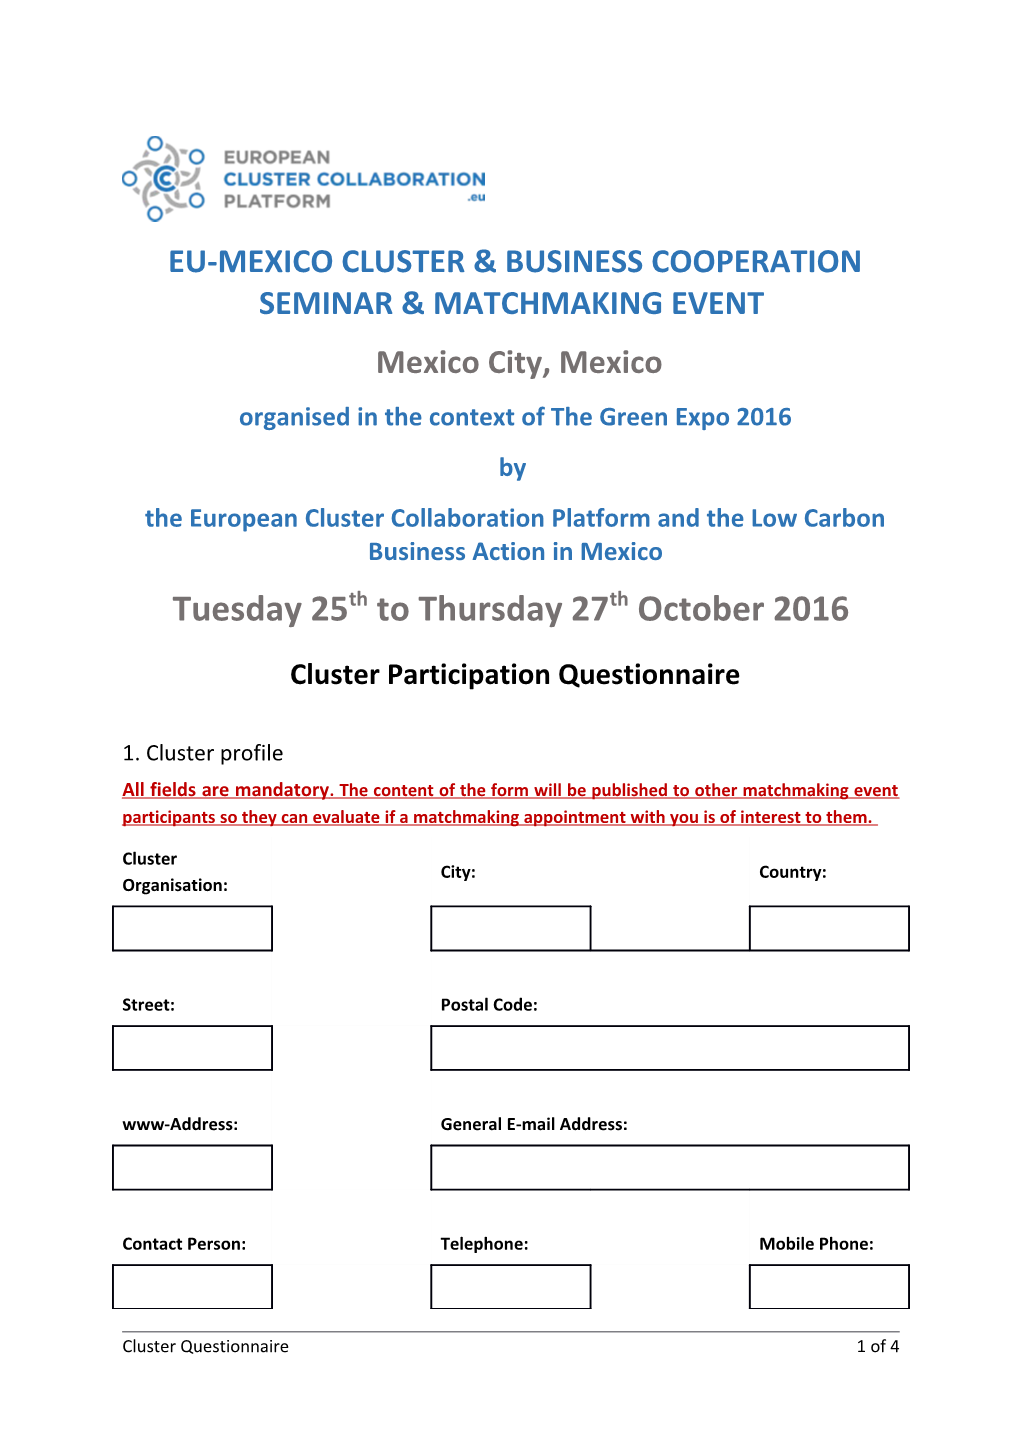 Eu-Mexico Cluster & Business Cooperation Seminar & Matchmaking Event